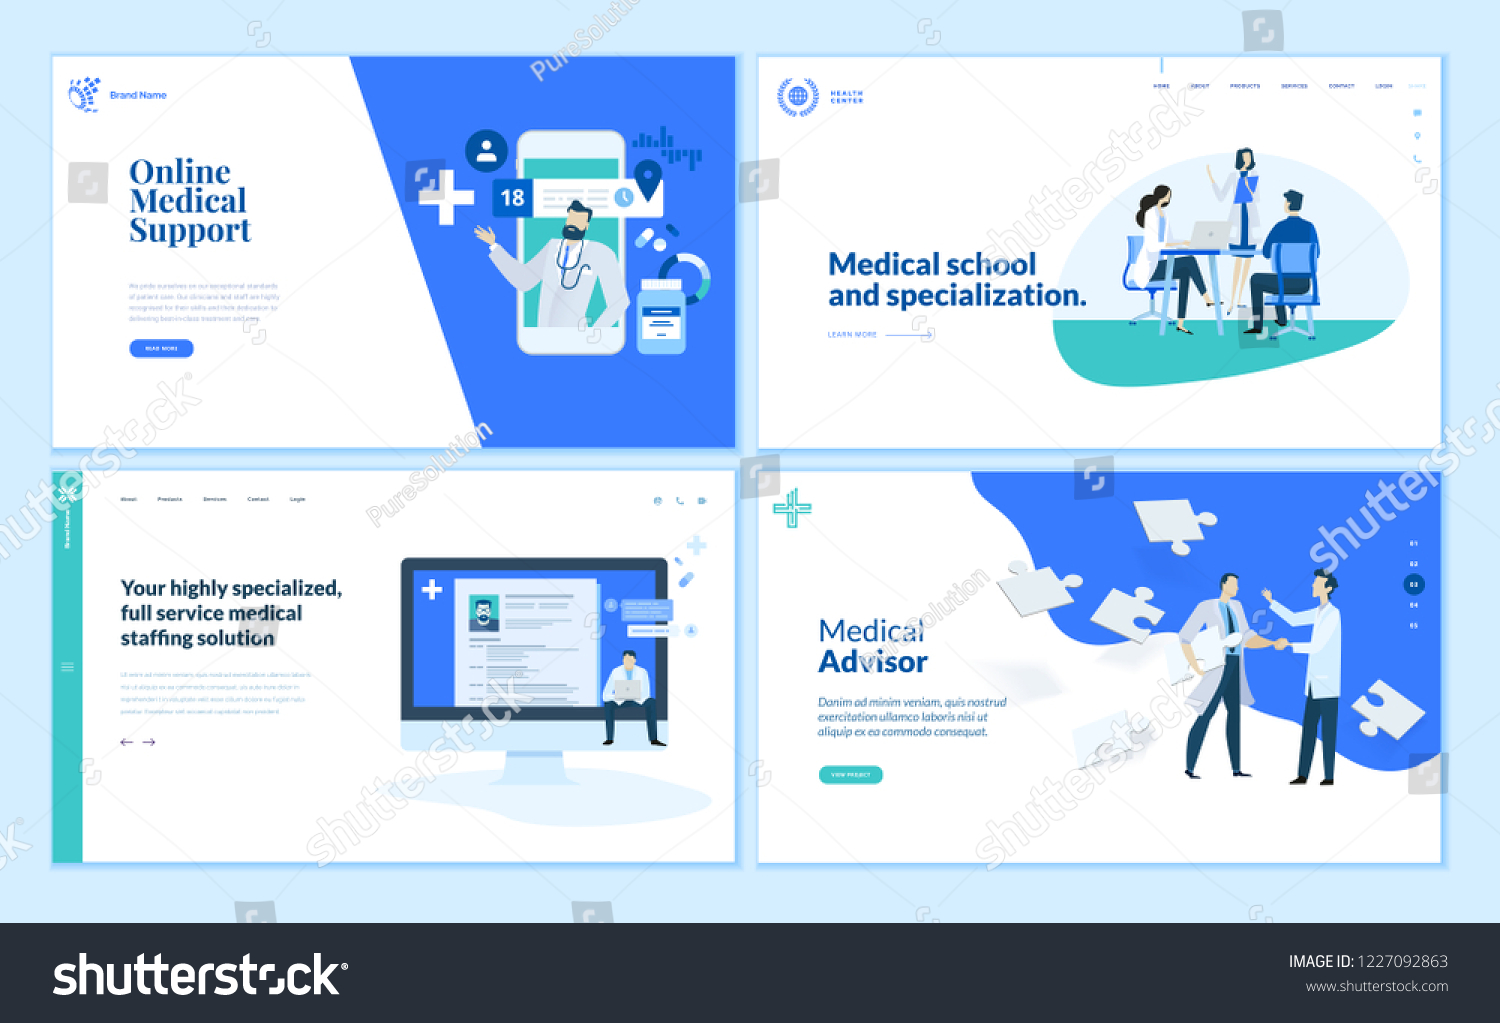 Web page design templates collection of online medical support, medical school and specialization, advisor. Modern vector illustration concepts for website and mobile website development.  #1227092863